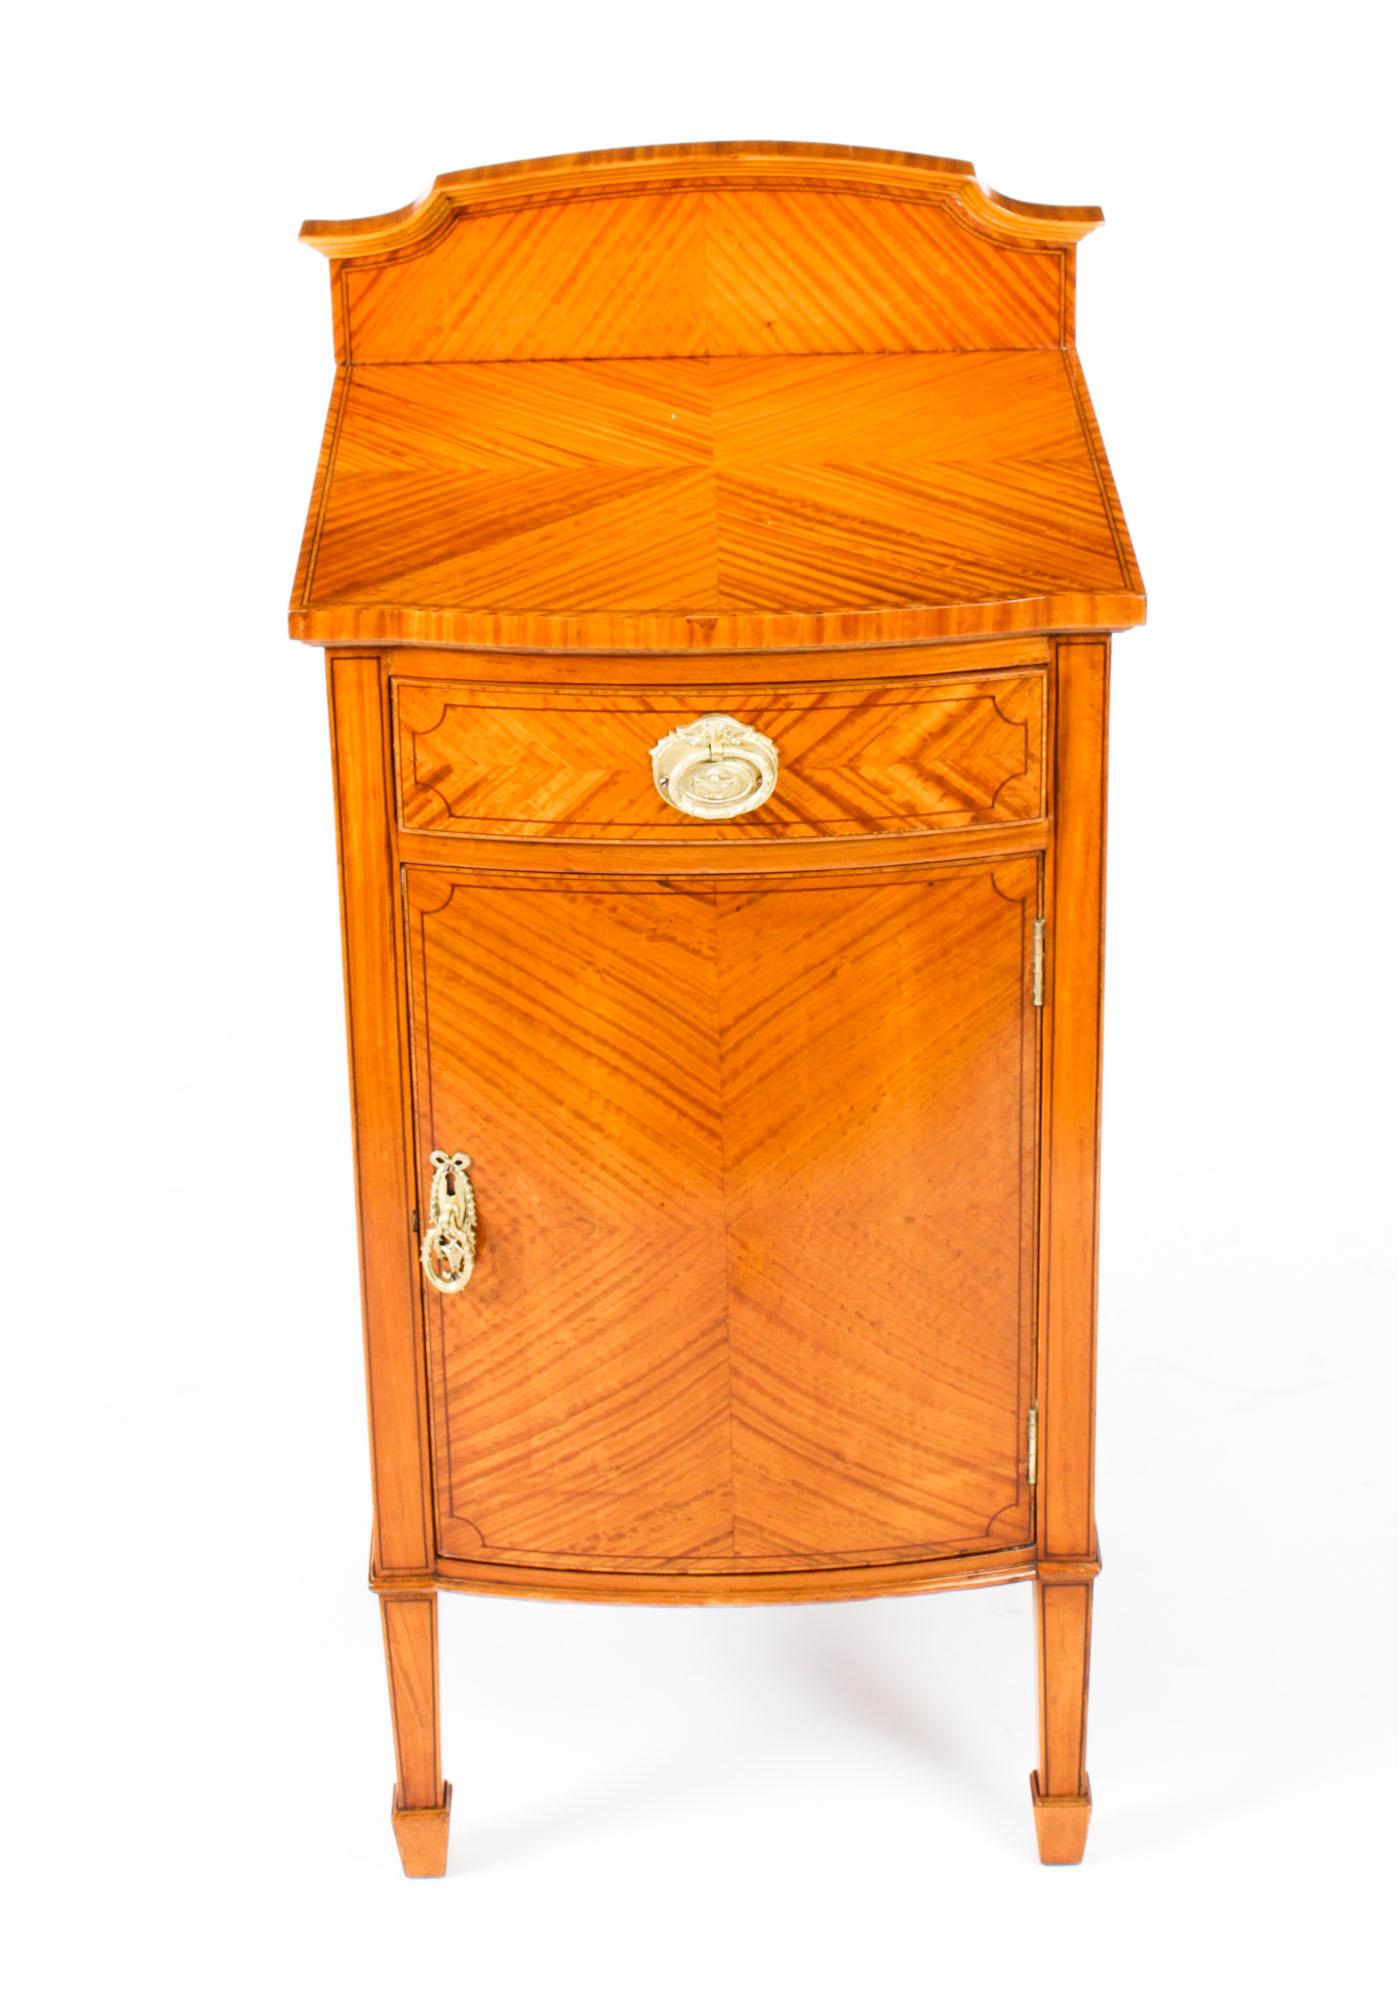 This is a splendid antique Victorian satinwood bedside cabinet, circa 1880 in date.

The cabinet features quarter veneered satinwood with decorative ebonized line inlay. It has a frieze drawer above a cupboard with a central shelf and is raised on